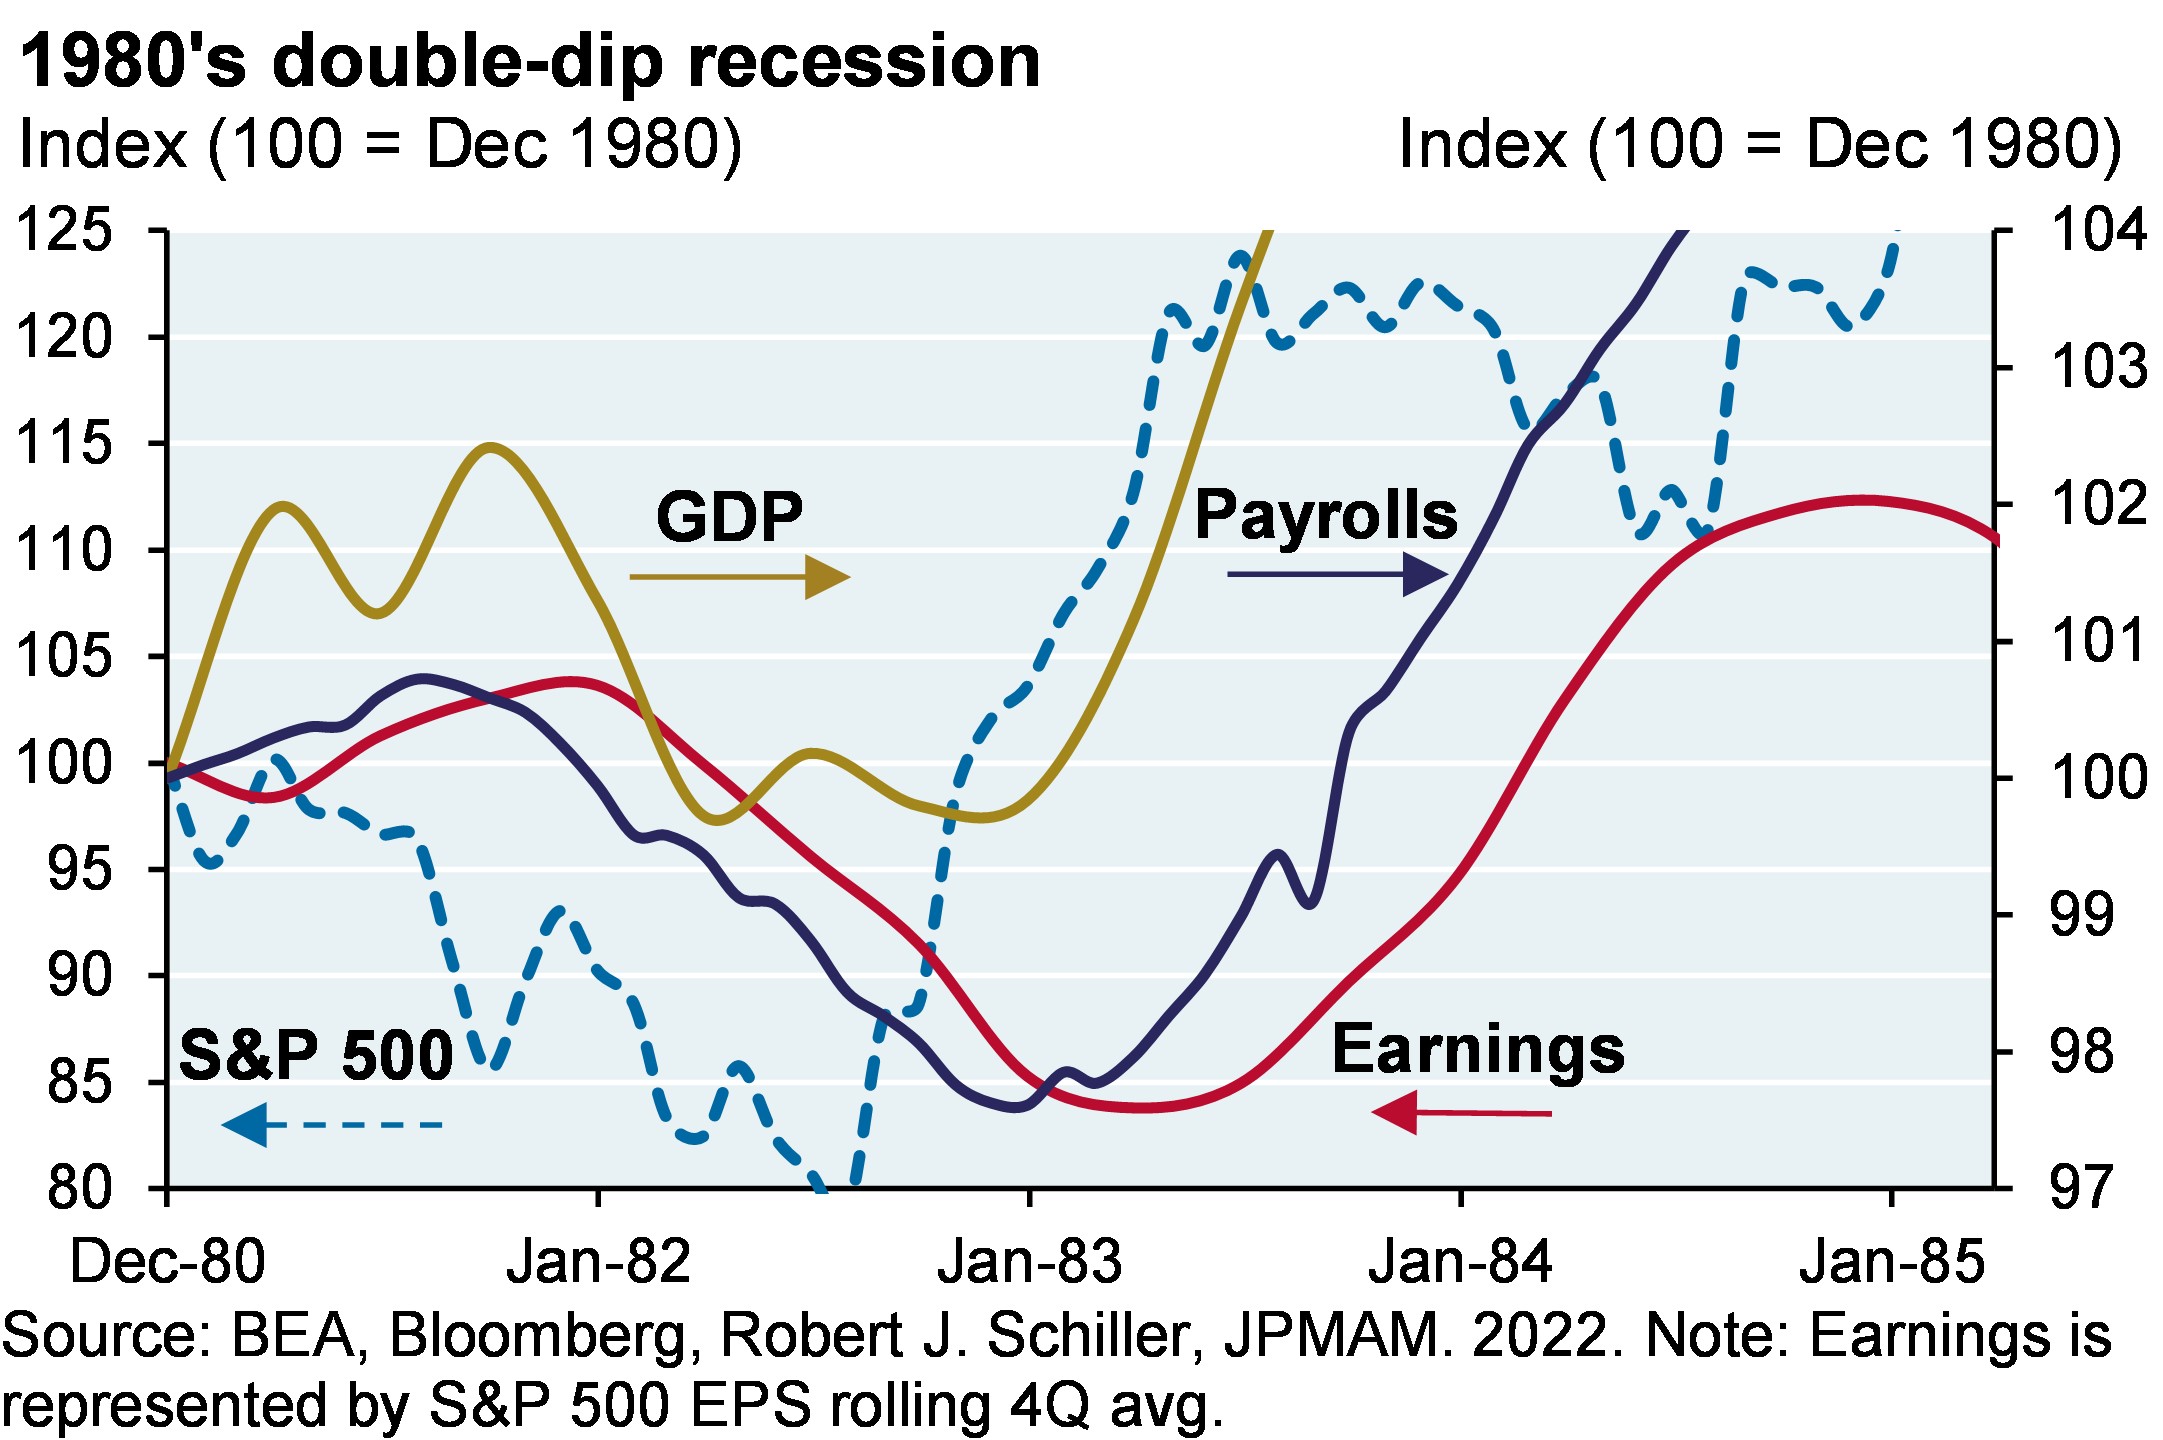 The indexed line chart compares the S&P 500, GDP, Earnings, and Nonfarm Payrolls throughout the double-dip recession from December 1980 to December 1985. The S&P 500 bottomed in July 1982, followed by GDP in September 1982, Payrolls in December 1983 and Earnings in March 1983